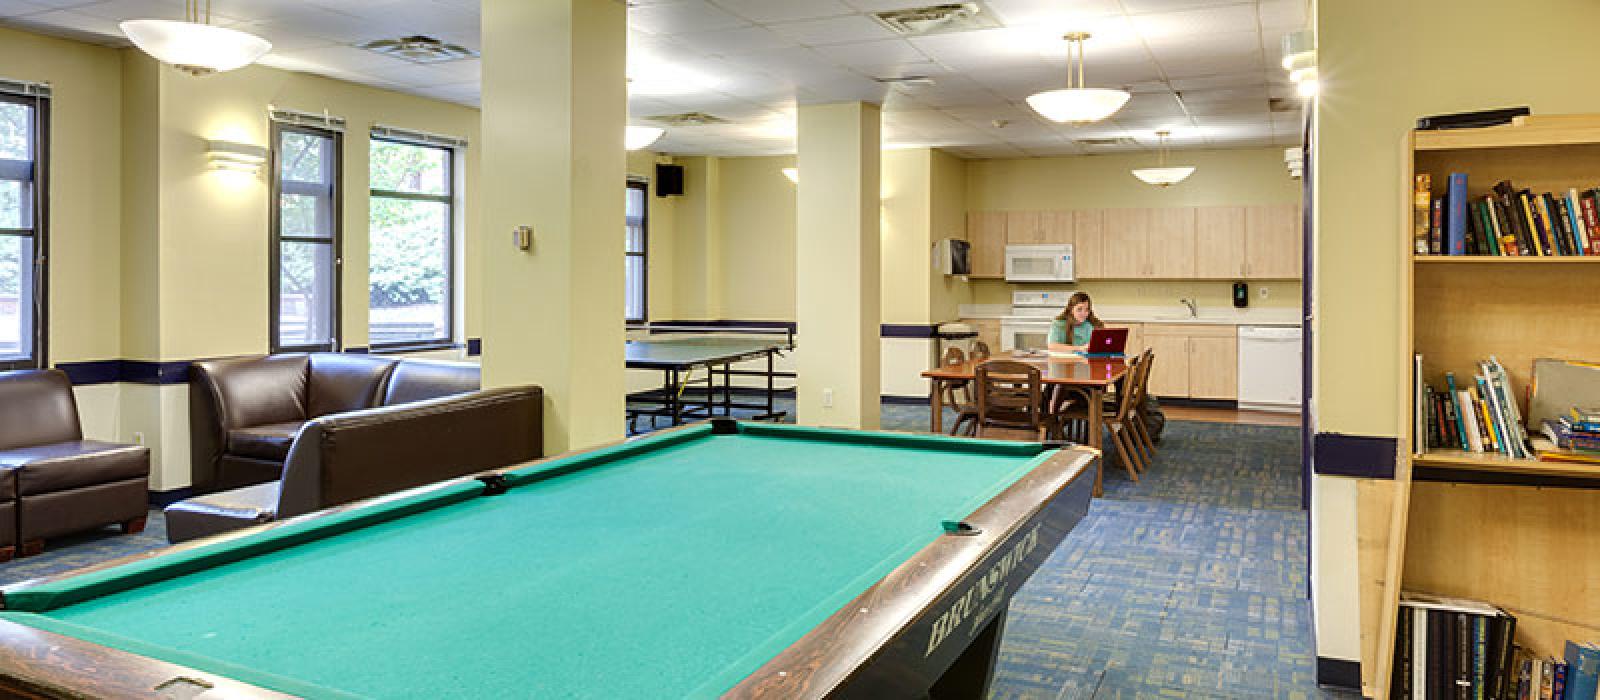 Activity room. Billiard table, chairs, table tennis table, table and chairs, kitchen in the background.